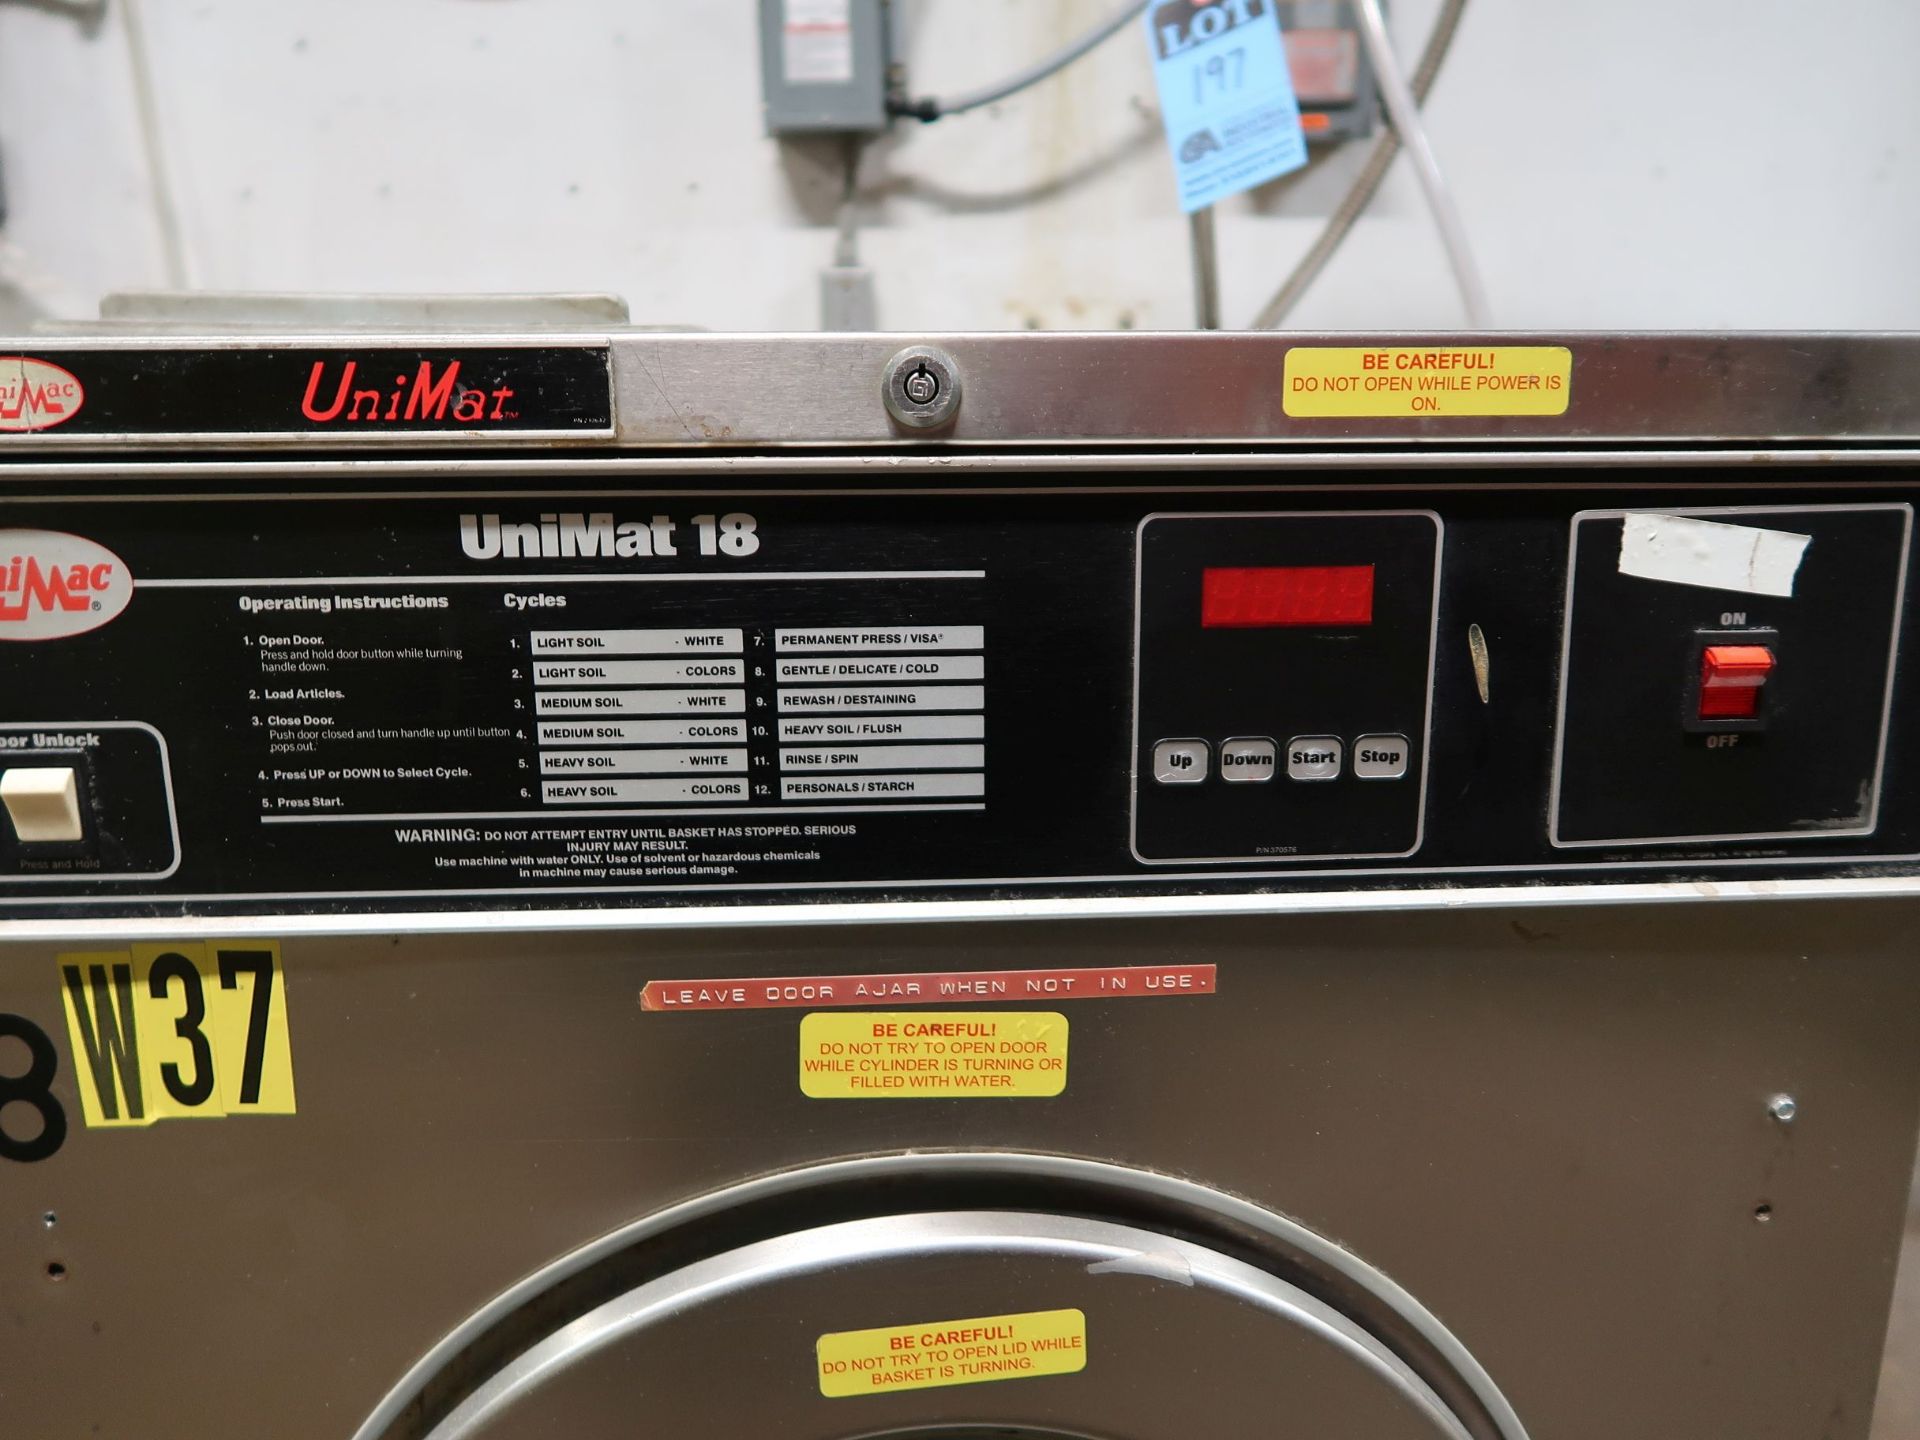 18 LB. UNIMAT MODEL UC18PN2NN2 WASHER / EXTRACTOR; S/N 0301249100006457 - Image 2 of 6